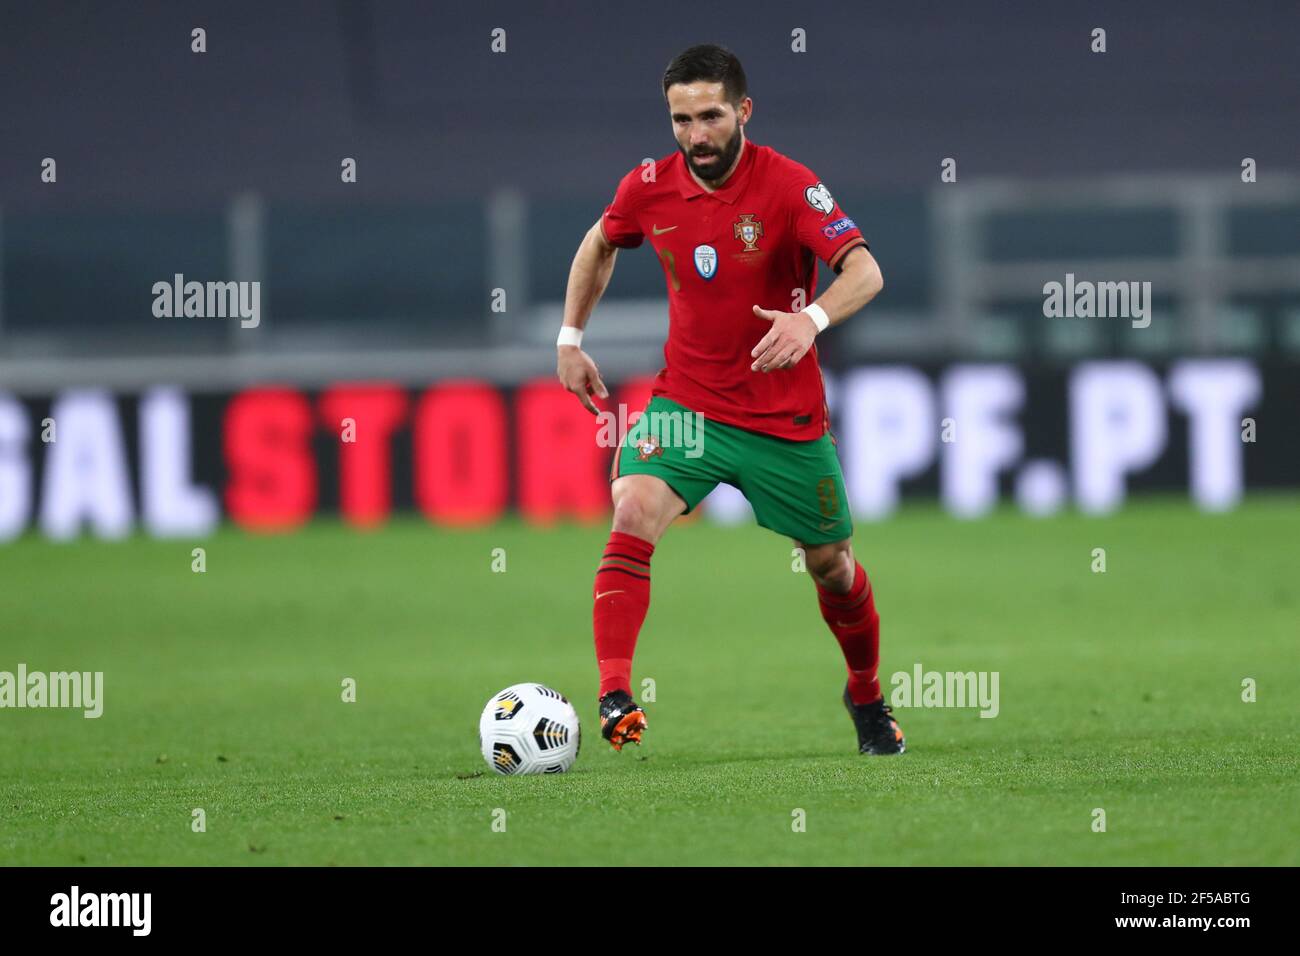 Joao Moutinho of Portugal  in action during the FIFA World Cup 2022 Qualifiers match between Portugal and Azerbaijan. Portugal wins 1-0 over Azerbaijan. Stock Photo